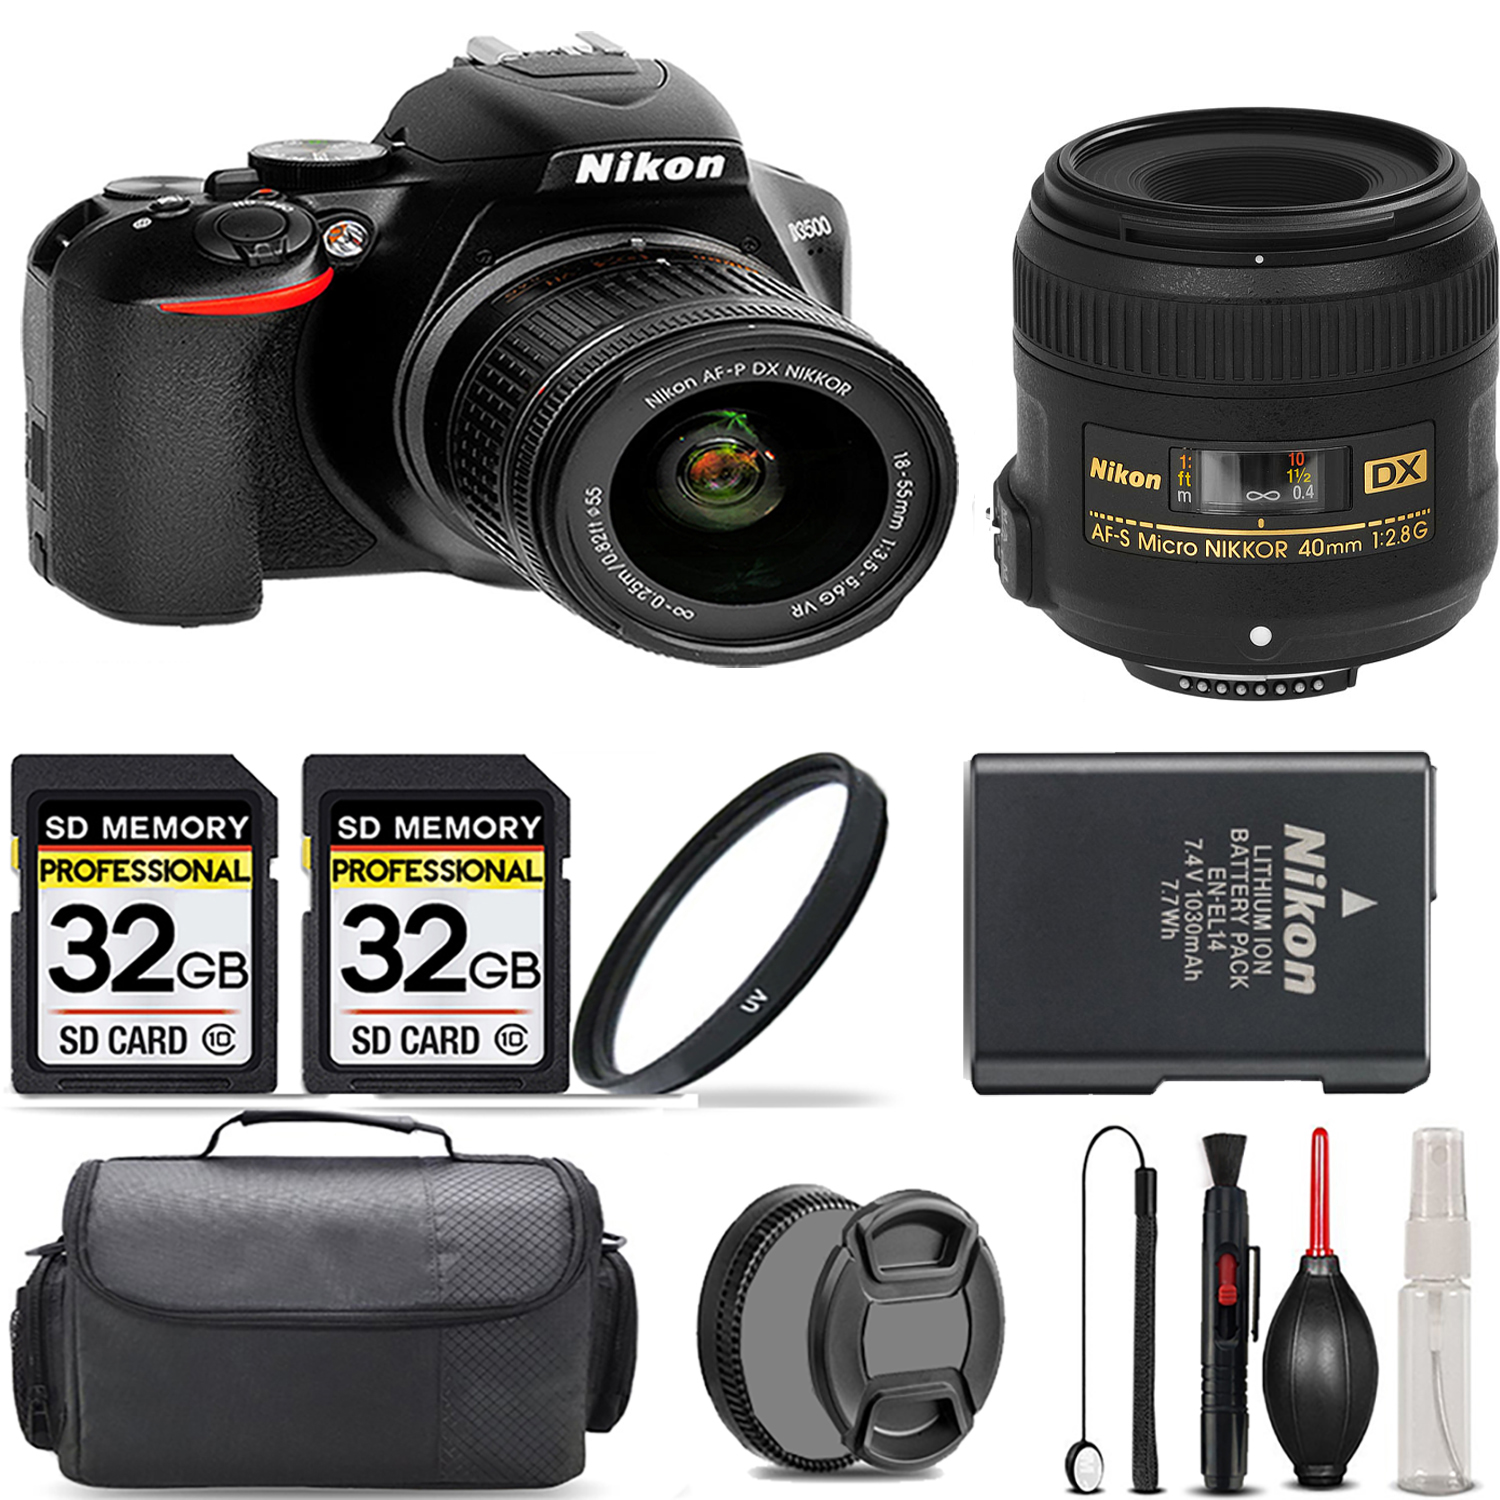 D3500 Camera with 18-55mm Lens + 40mm Lens + UV Filter + 64GB  & More! *FREE SHIPPING*